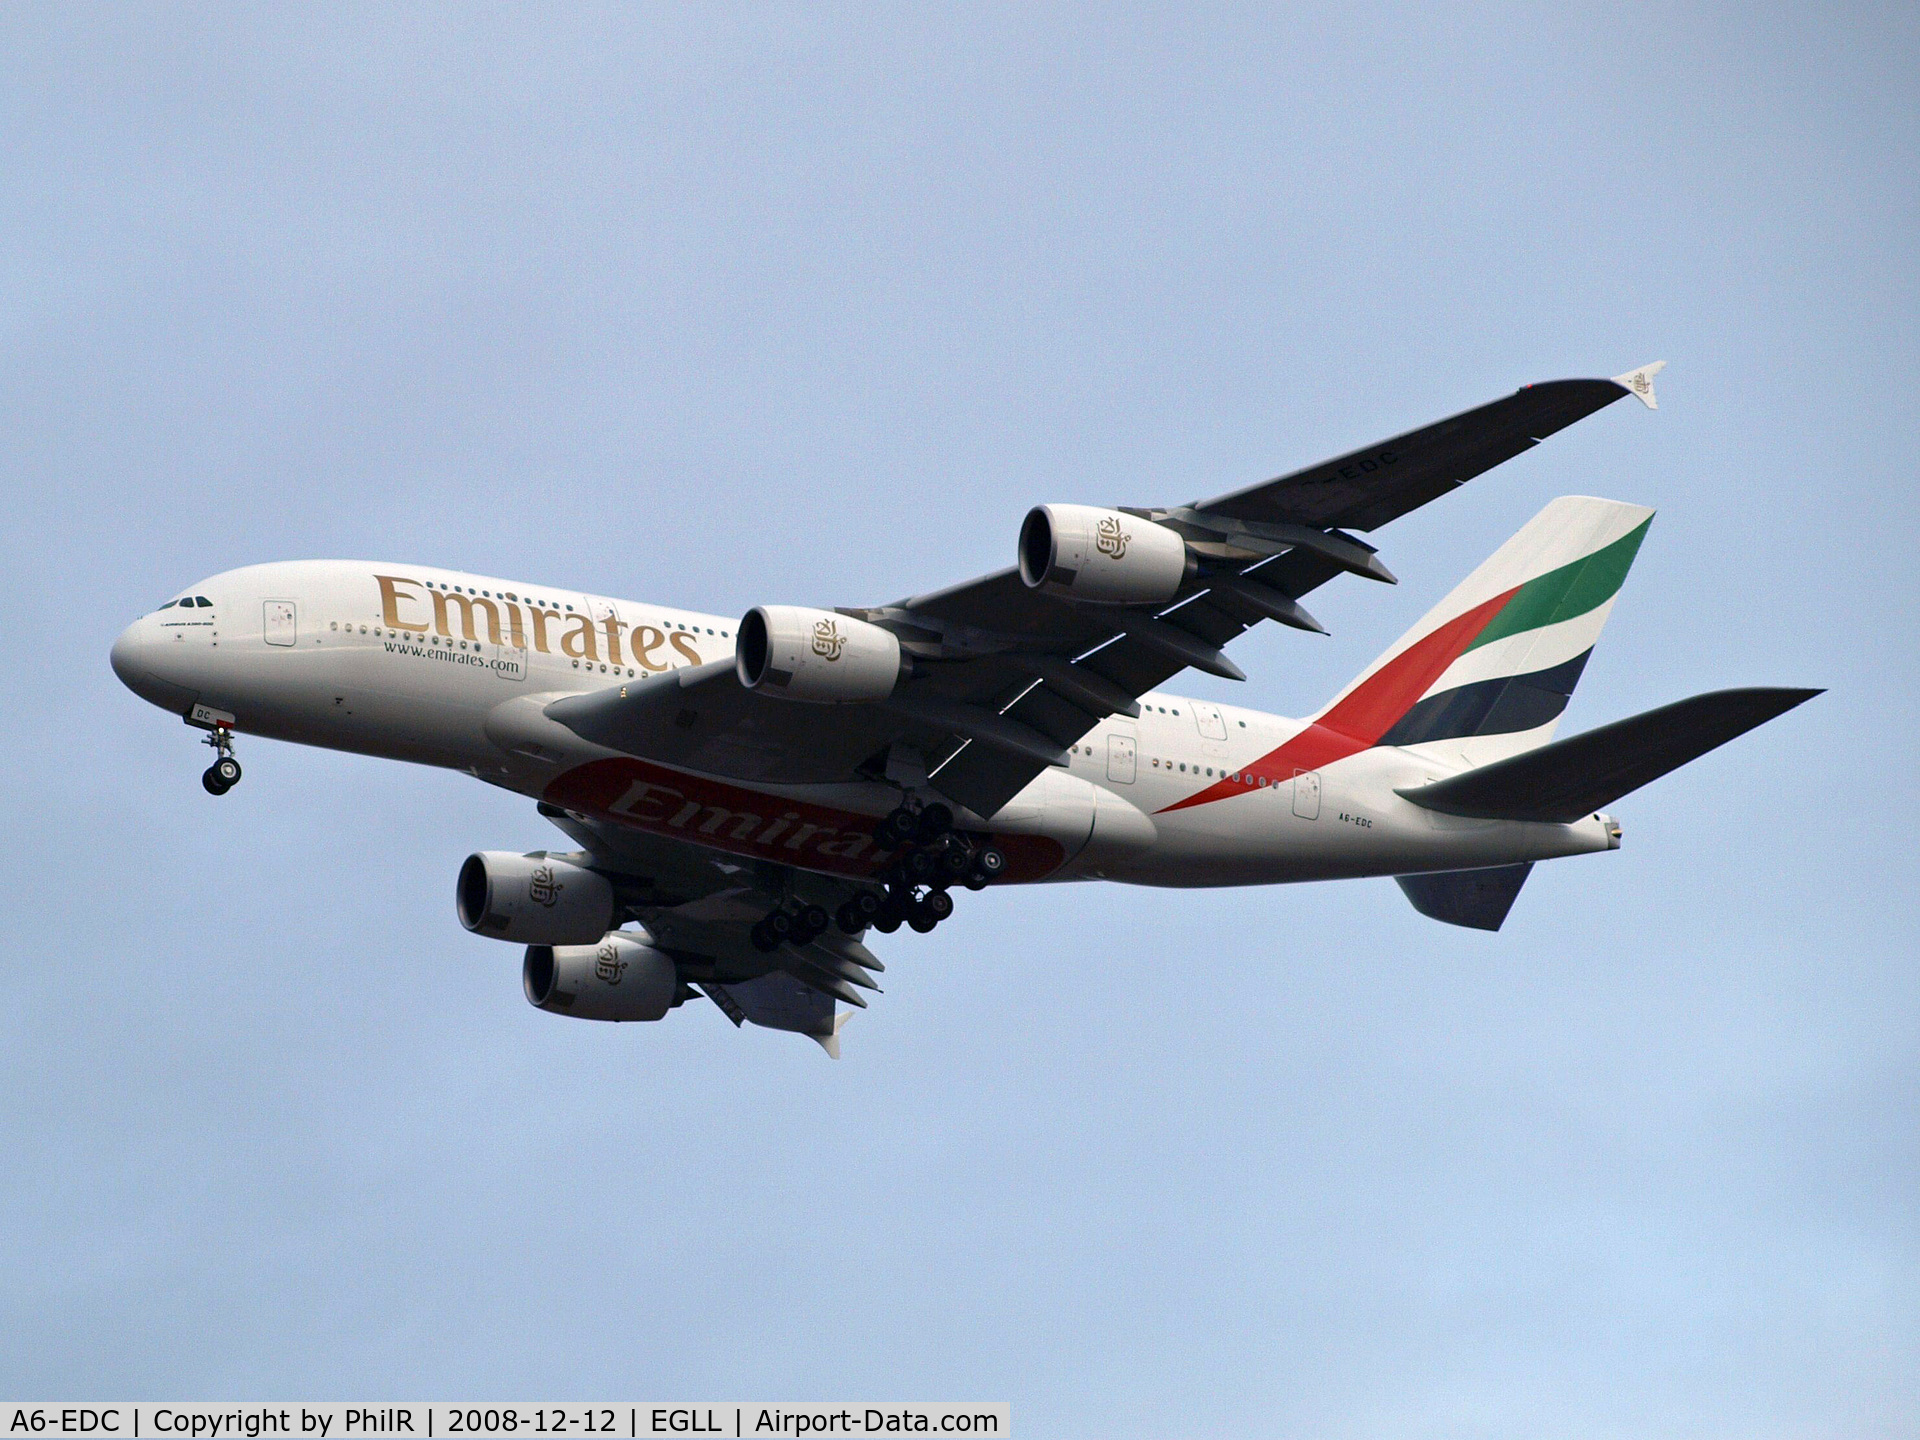 A6-EDC, 2008 Airbus A380-861 C/N 016, Emirates Airbus A380-800 on finals to LHR's 27L